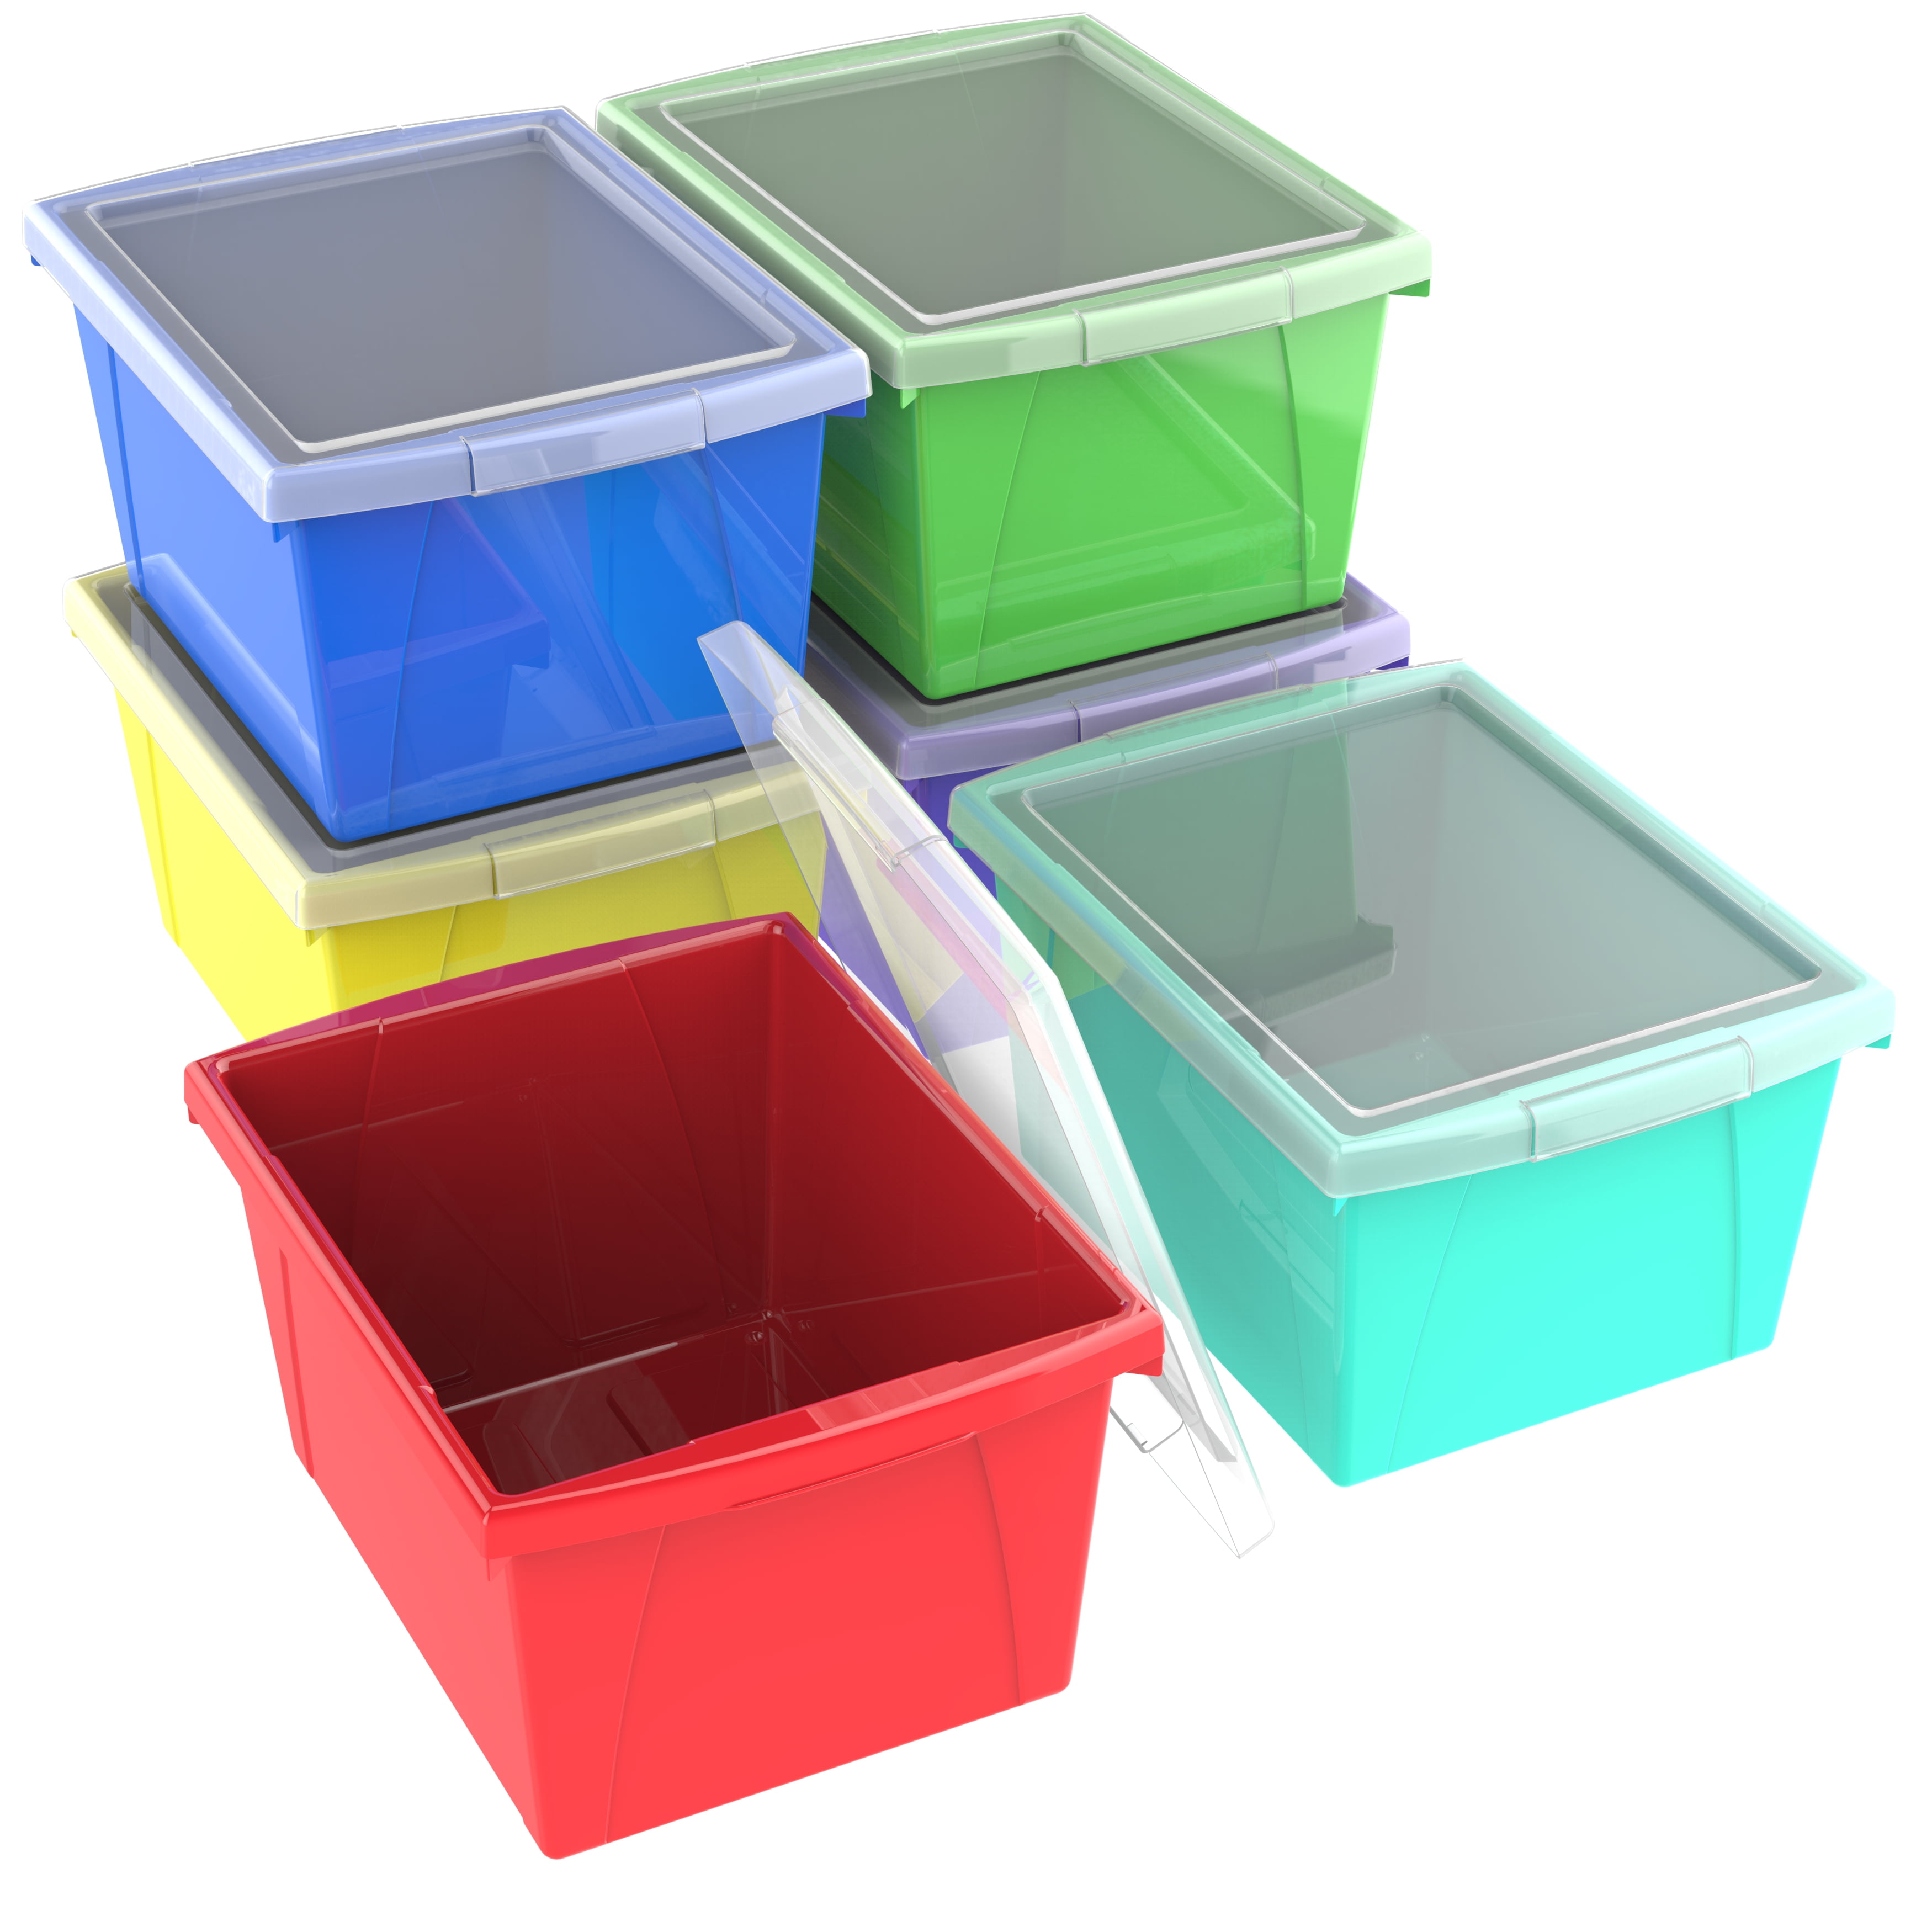 Kiddream 6 Liter Plastic Boxes, Small Storage Bin with Lid Set of 4